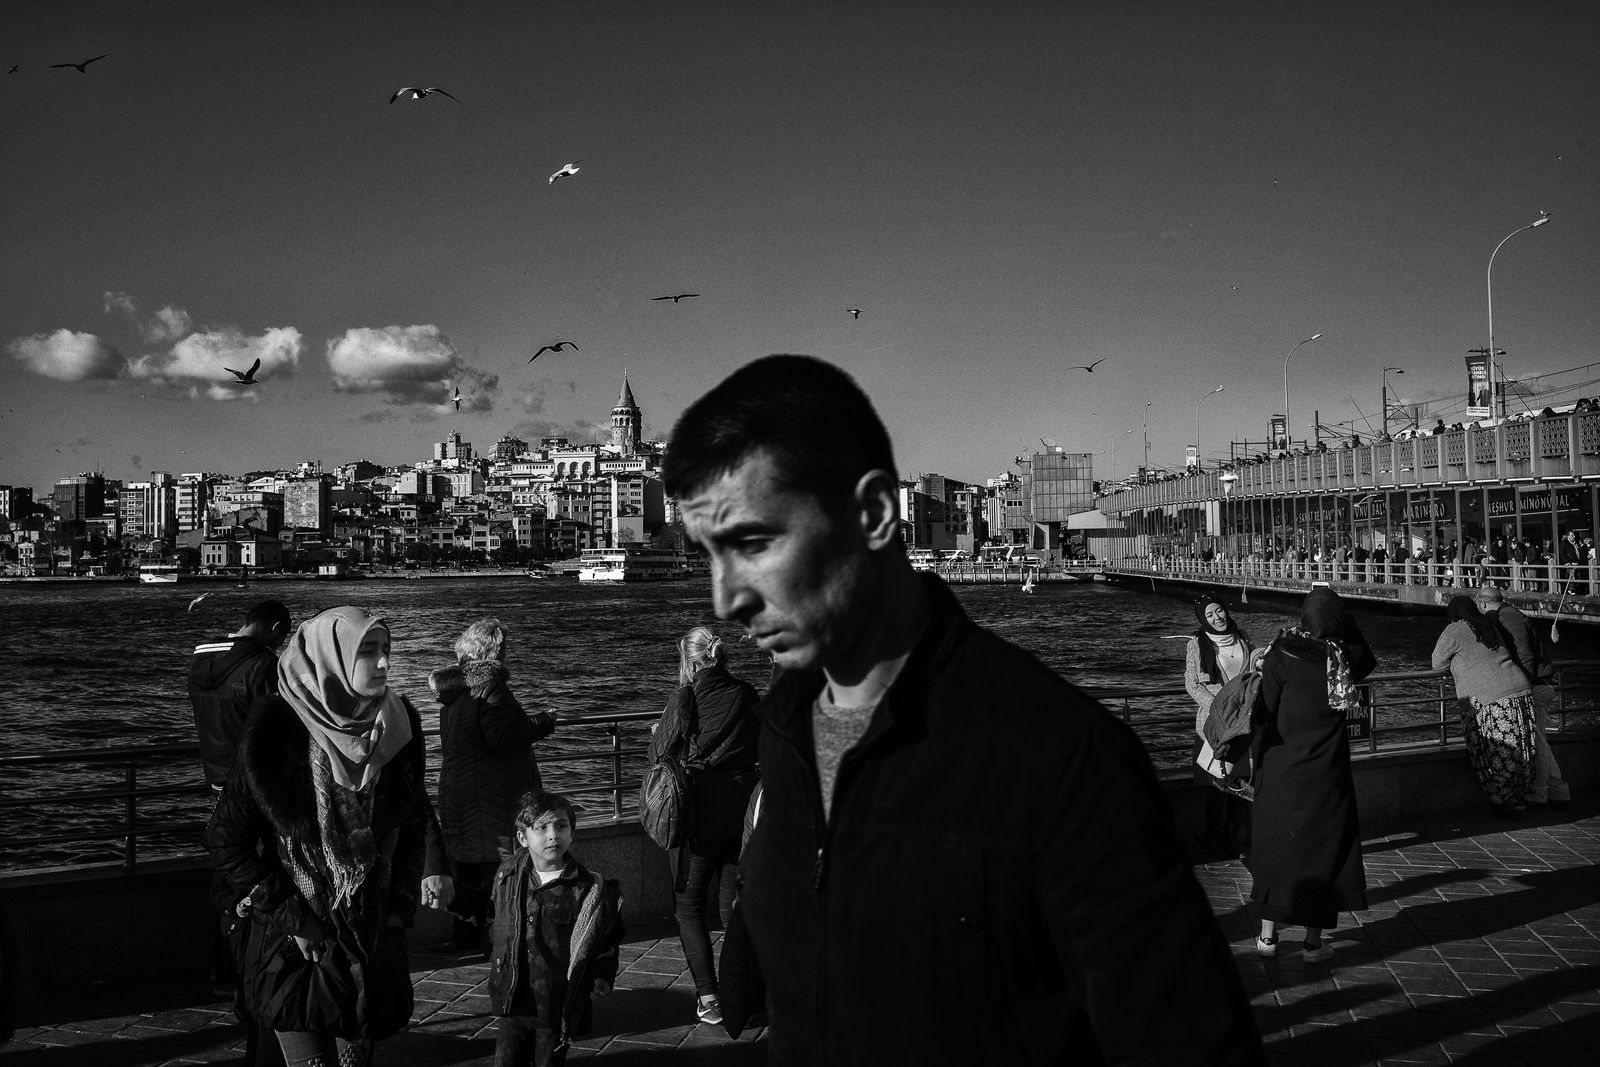 © Maurizio Gjivovich - Image from the ISTANBUL photography project